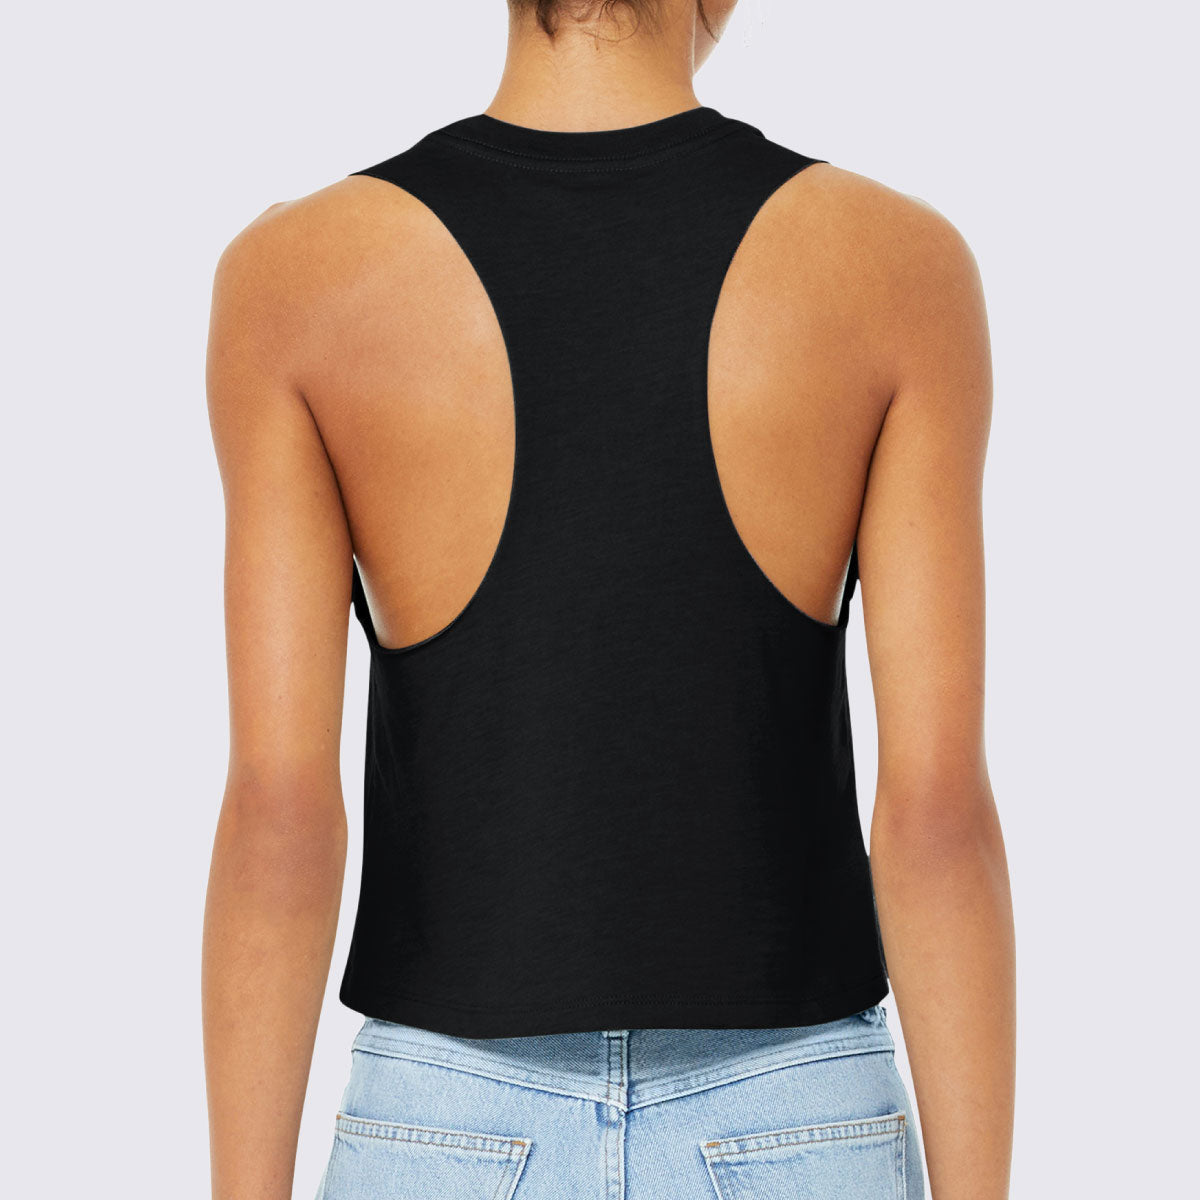 The Limit Does Not Exist Racerback Crop Tank